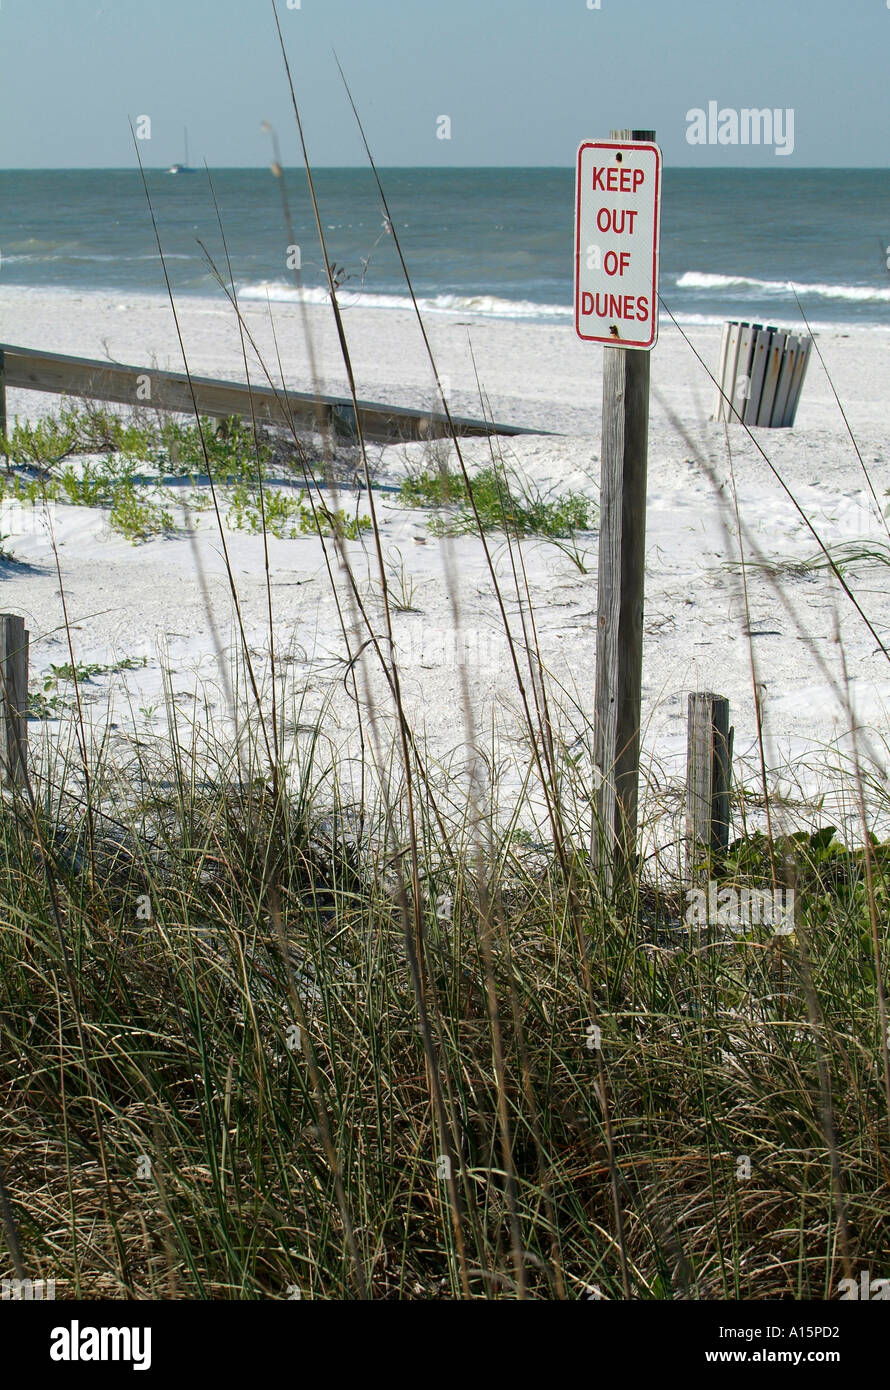 Signs along the St Pete Florida beach regulating use and protecting the environment Stock Photo